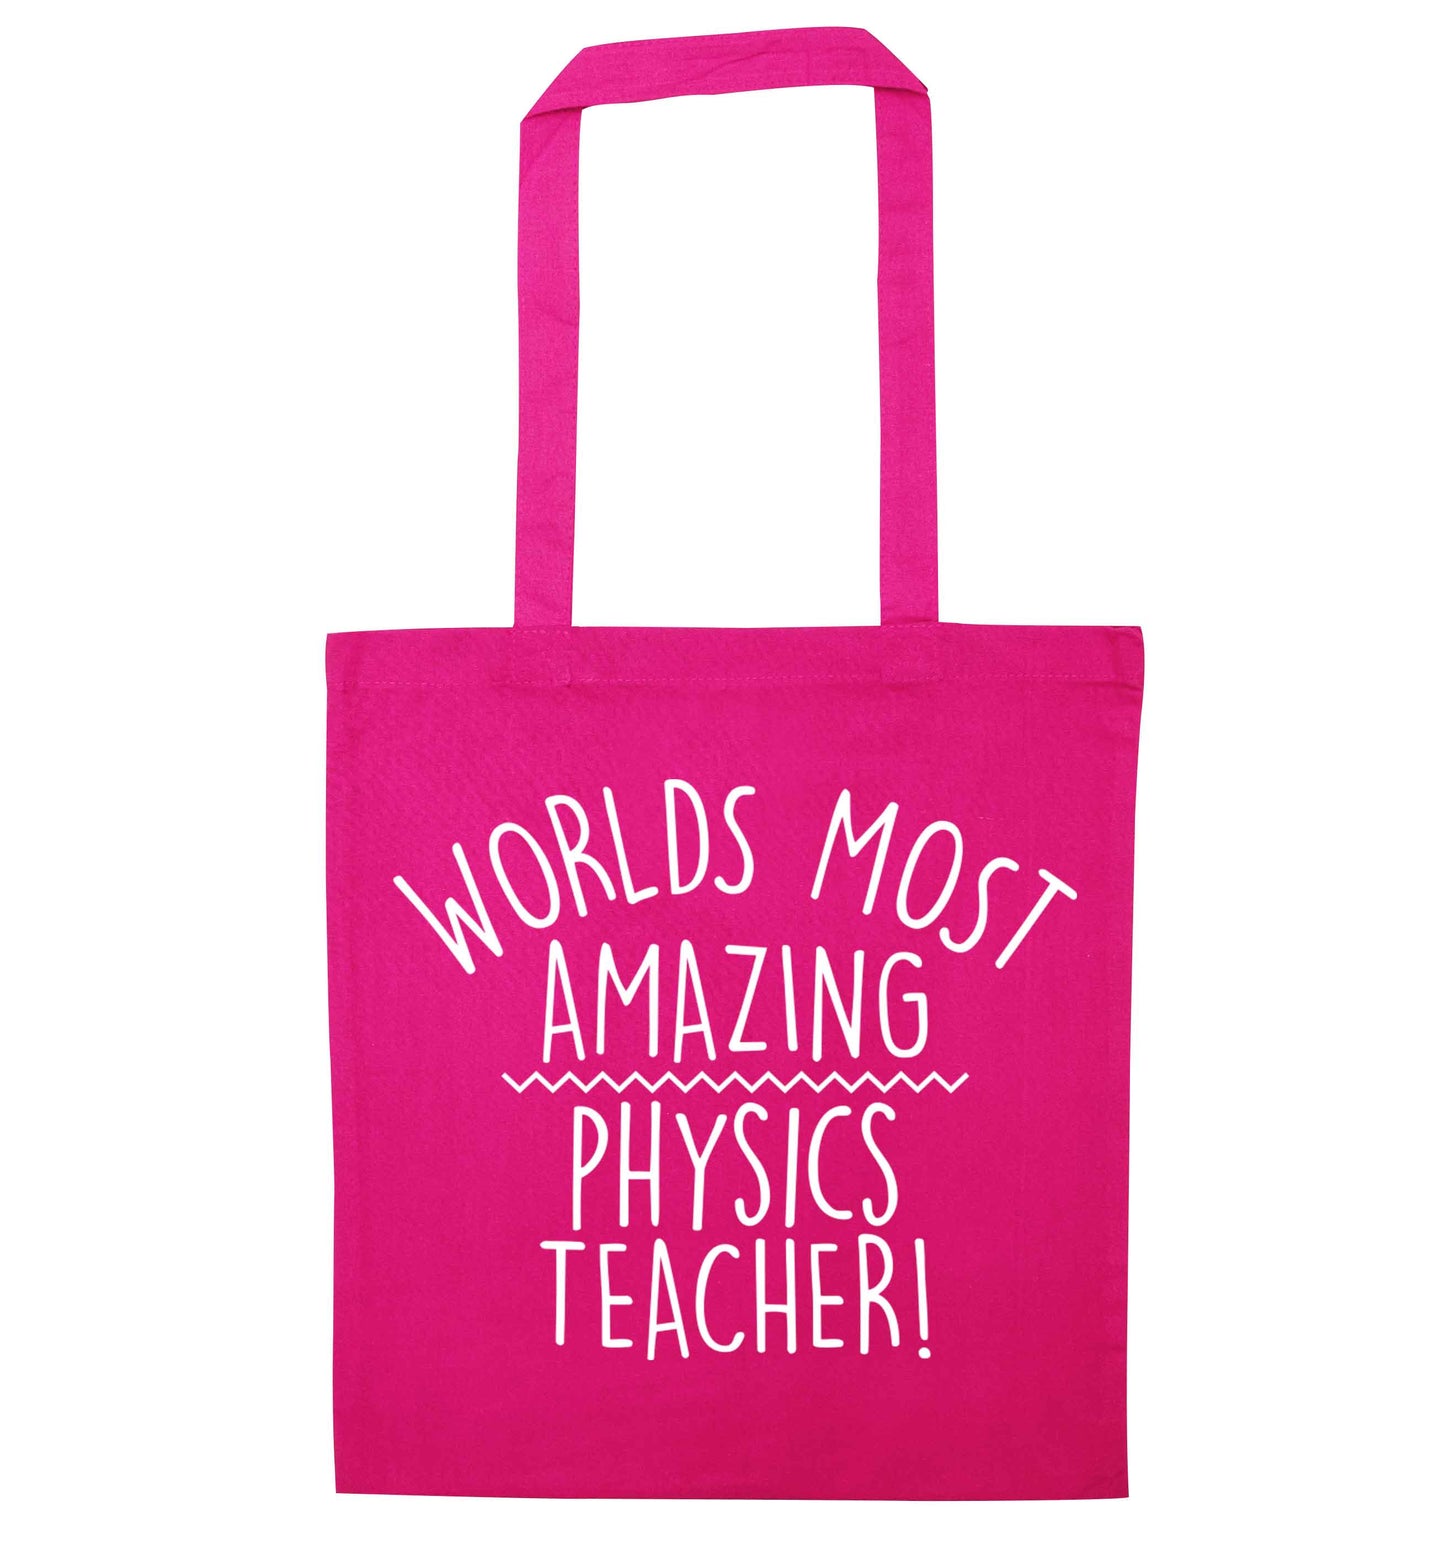 Worlds most amazing physics teacher pink tote bag